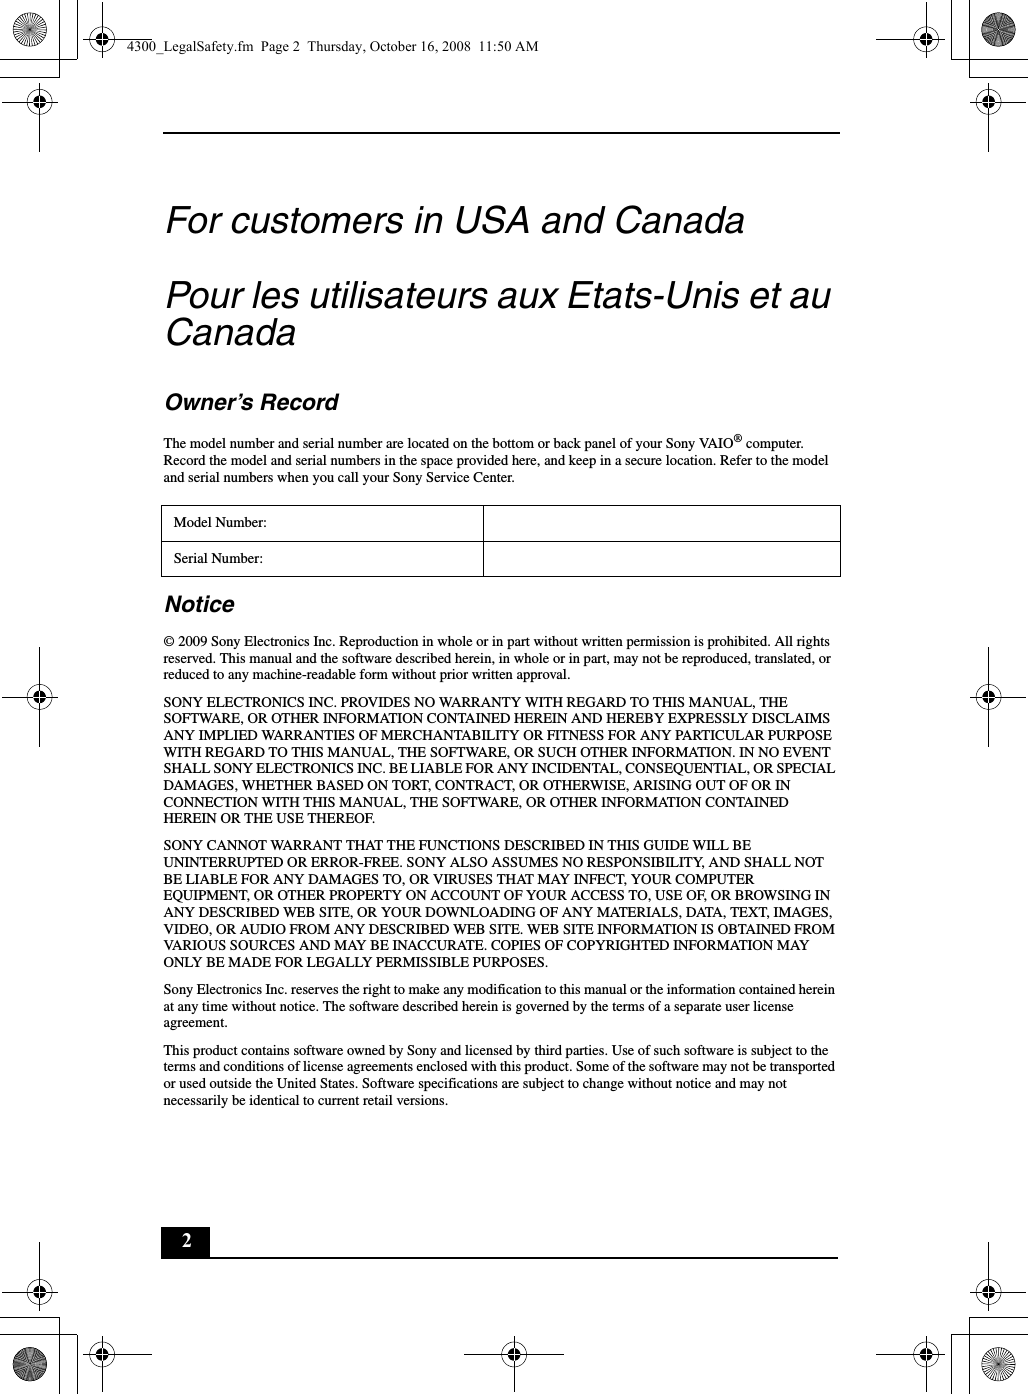 2For customers in USA and CanadaPour les utilisateurs aux Etats-Unis et au CanadaOwner’s RecordThe model number and serial number are located on the bottom or back panel of your Sony VAIO® computer. Record the model and serial numbers in the space provided here, and keep in a secure location. Refer to the model and serial numbers when you call your Sony Service Center.Notice© 2009 Sony Electronics Inc. Reproduction in whole or in part without written permission is prohibited. All rights reserved. This manual and the software described herein, in whole or in part, may not be reproduced, translated, or reduced to any machine-readable form without prior written approval.SONY ELECTRONICS INC. PROVIDES NO WARRANTY WITH REGARD TO THIS MANUAL, THE SOFTWARE, OR OTHER INFORMATION CONTAINED HEREIN AND HEREBY EXPRESSLY DISCLAIMS ANY IMPLIED WARRANTIES OF MERCHANTABILITY OR FITNESS FOR ANY PARTICULAR PURPOSE WITH REGARD TO THIS MANUAL, THE SOFTWARE, OR SUCH OTHER INFORMATION. IN NO EVENT SHALL SONY ELECTRONICS INC. BE LIABLE FOR ANY INCIDENTAL, CONSEQUENTIAL, OR SPECIAL DAMAGES, WHETHER BASED ON TORT, CONTRACT, OR OTHERWISE, ARISING OUT OF OR IN CONNECTION WITH THIS MANUAL, THE SOFTWARE, OR OTHER INFORMATION CONTAINED HEREIN OR THE USE THEREOF.SONY CANNOT WARRANT THAT THE FUNCTIONS DESCRIBED IN THIS GUIDE WILL BE UNINTERRUPTED OR ERROR-FREE. SONY ALSO ASSUMES NO RESPONSIBILITY, AND SHALL NOT BE LIABLE FOR ANY DAMAGES TO, OR VIRUSES THAT MAY INFECT, YOUR COMPUTER EQUIPMENT, OR OTHER PROPERTY ON ACCOUNT OF YOUR ACCESS TO, USE OF, OR BROWSING IN ANY DESCRIBED WEB SITE, OR YOUR DOWNLOADING OF ANY MATERIALS, DATA, TEXT, IMAGES, VIDEO, OR AUDIO FROM ANY DESCRIBED WEB SITE. WEB SITE INFORMATION IS OBTAINED FROM VARIOUS SOURCES AND MAY BE INACCURATE. COPIES OF COPYRIGHTED INFORMATION MAY ONLY BE MADE FOR LEGALLY PERMISSIBLE PURPOSES.Sony Electronics Inc. reserves the right to make any modification to this manual or the information contained herein at any time without notice. The software described herein is governed by the terms of a separate user license agreement.This product contains software owned by Sony and licensed by third parties. Use of such software is subject to the terms and conditions of license agreements enclosed with this product. Some of the software may not be transported or used outside the United States. Software specifications are subject to change without notice and may not necessarily be identical to current retail versions.Model Number:Serial Number:4300_LegalSafety.fm  Page 2  Thursday, October 16, 2008  11:50 AM